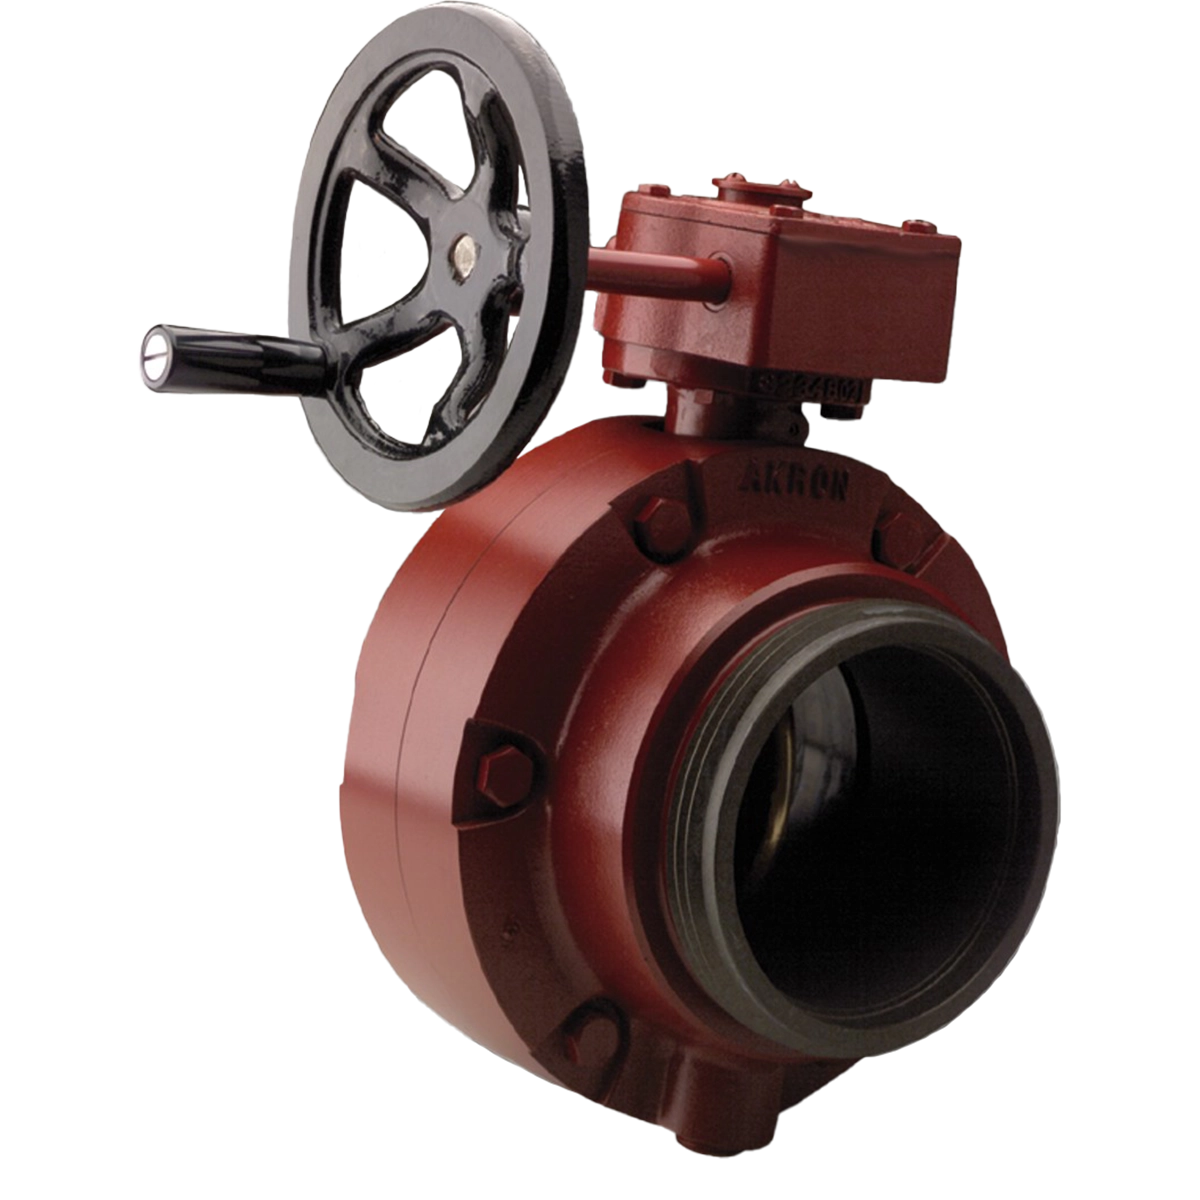 Akron 4.5" Butterfly Valve Handwheel, With Adapters 